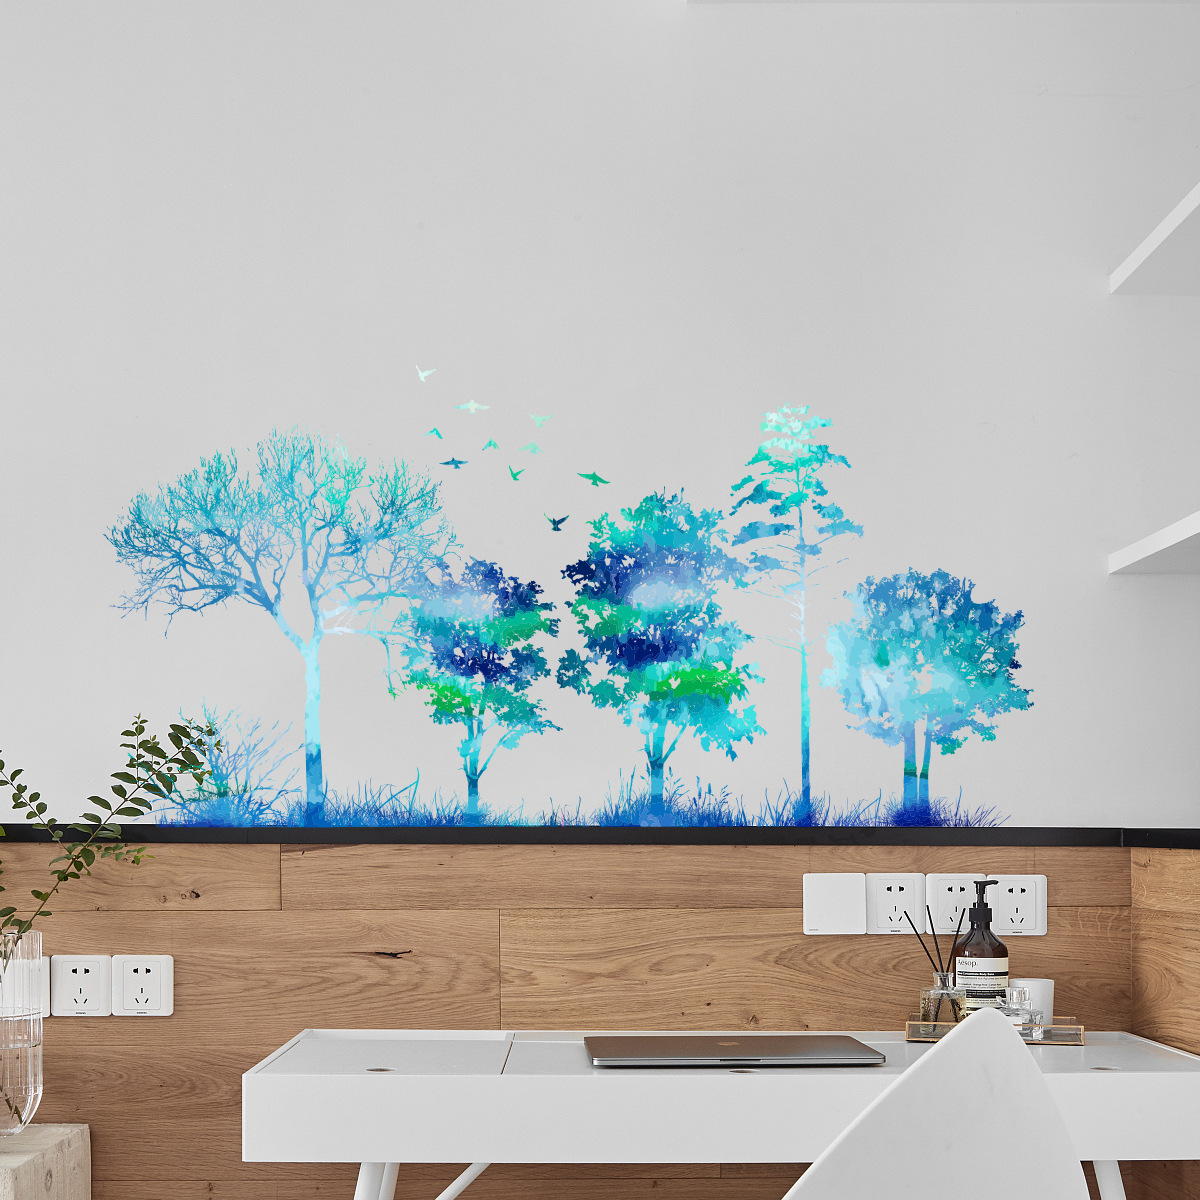 ZW106-Creative-Wall-Stickers-Folding-Version-Of-The-New-Hand-Painted-Blue-Gradient-Forest-Plants-Liv-1811493-5